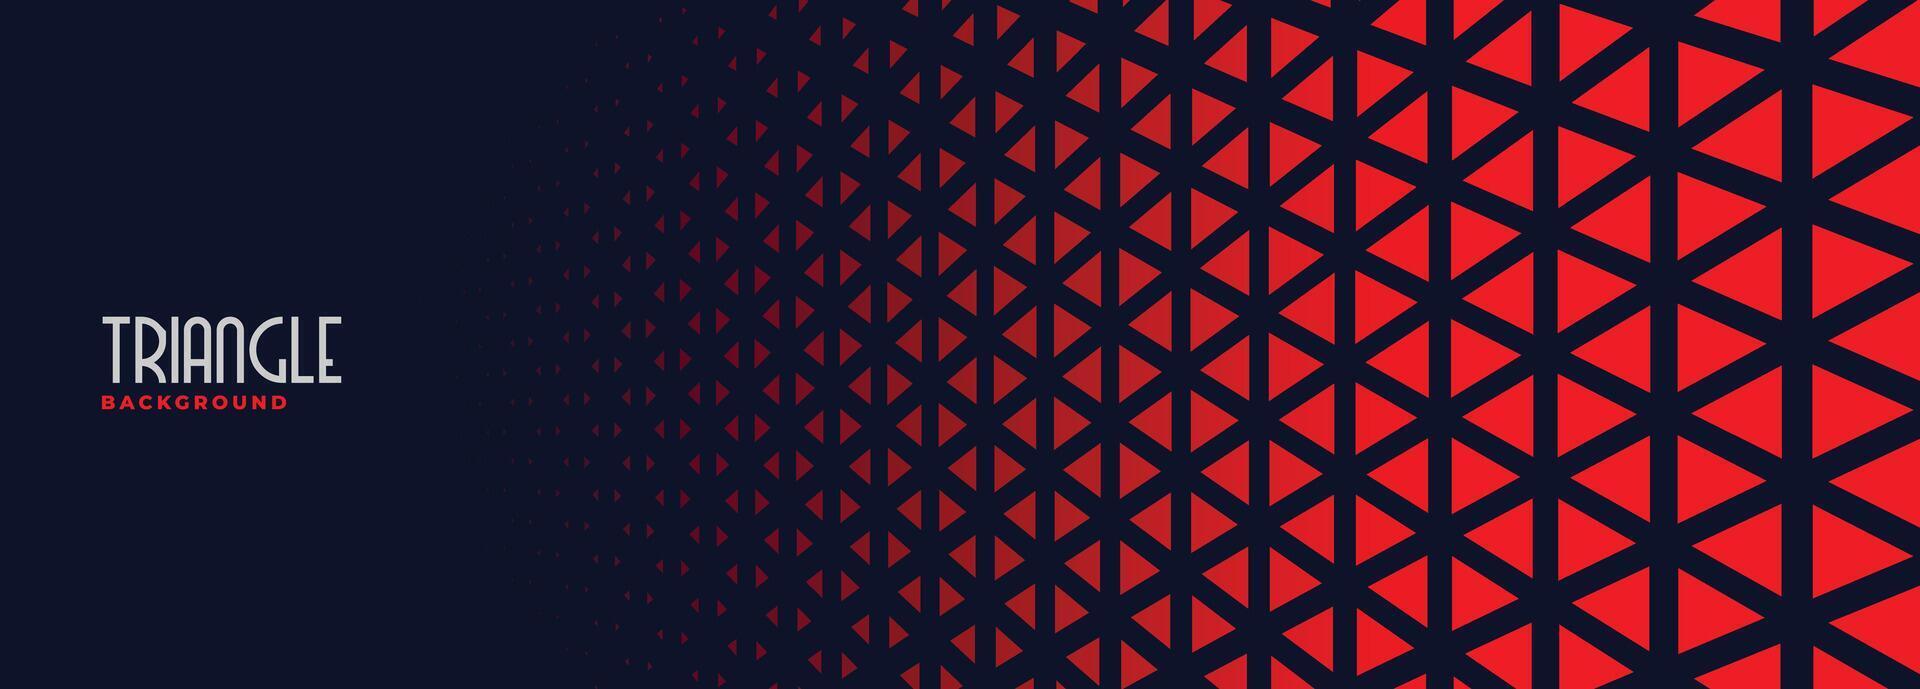 red triangles pattern on black banner vector